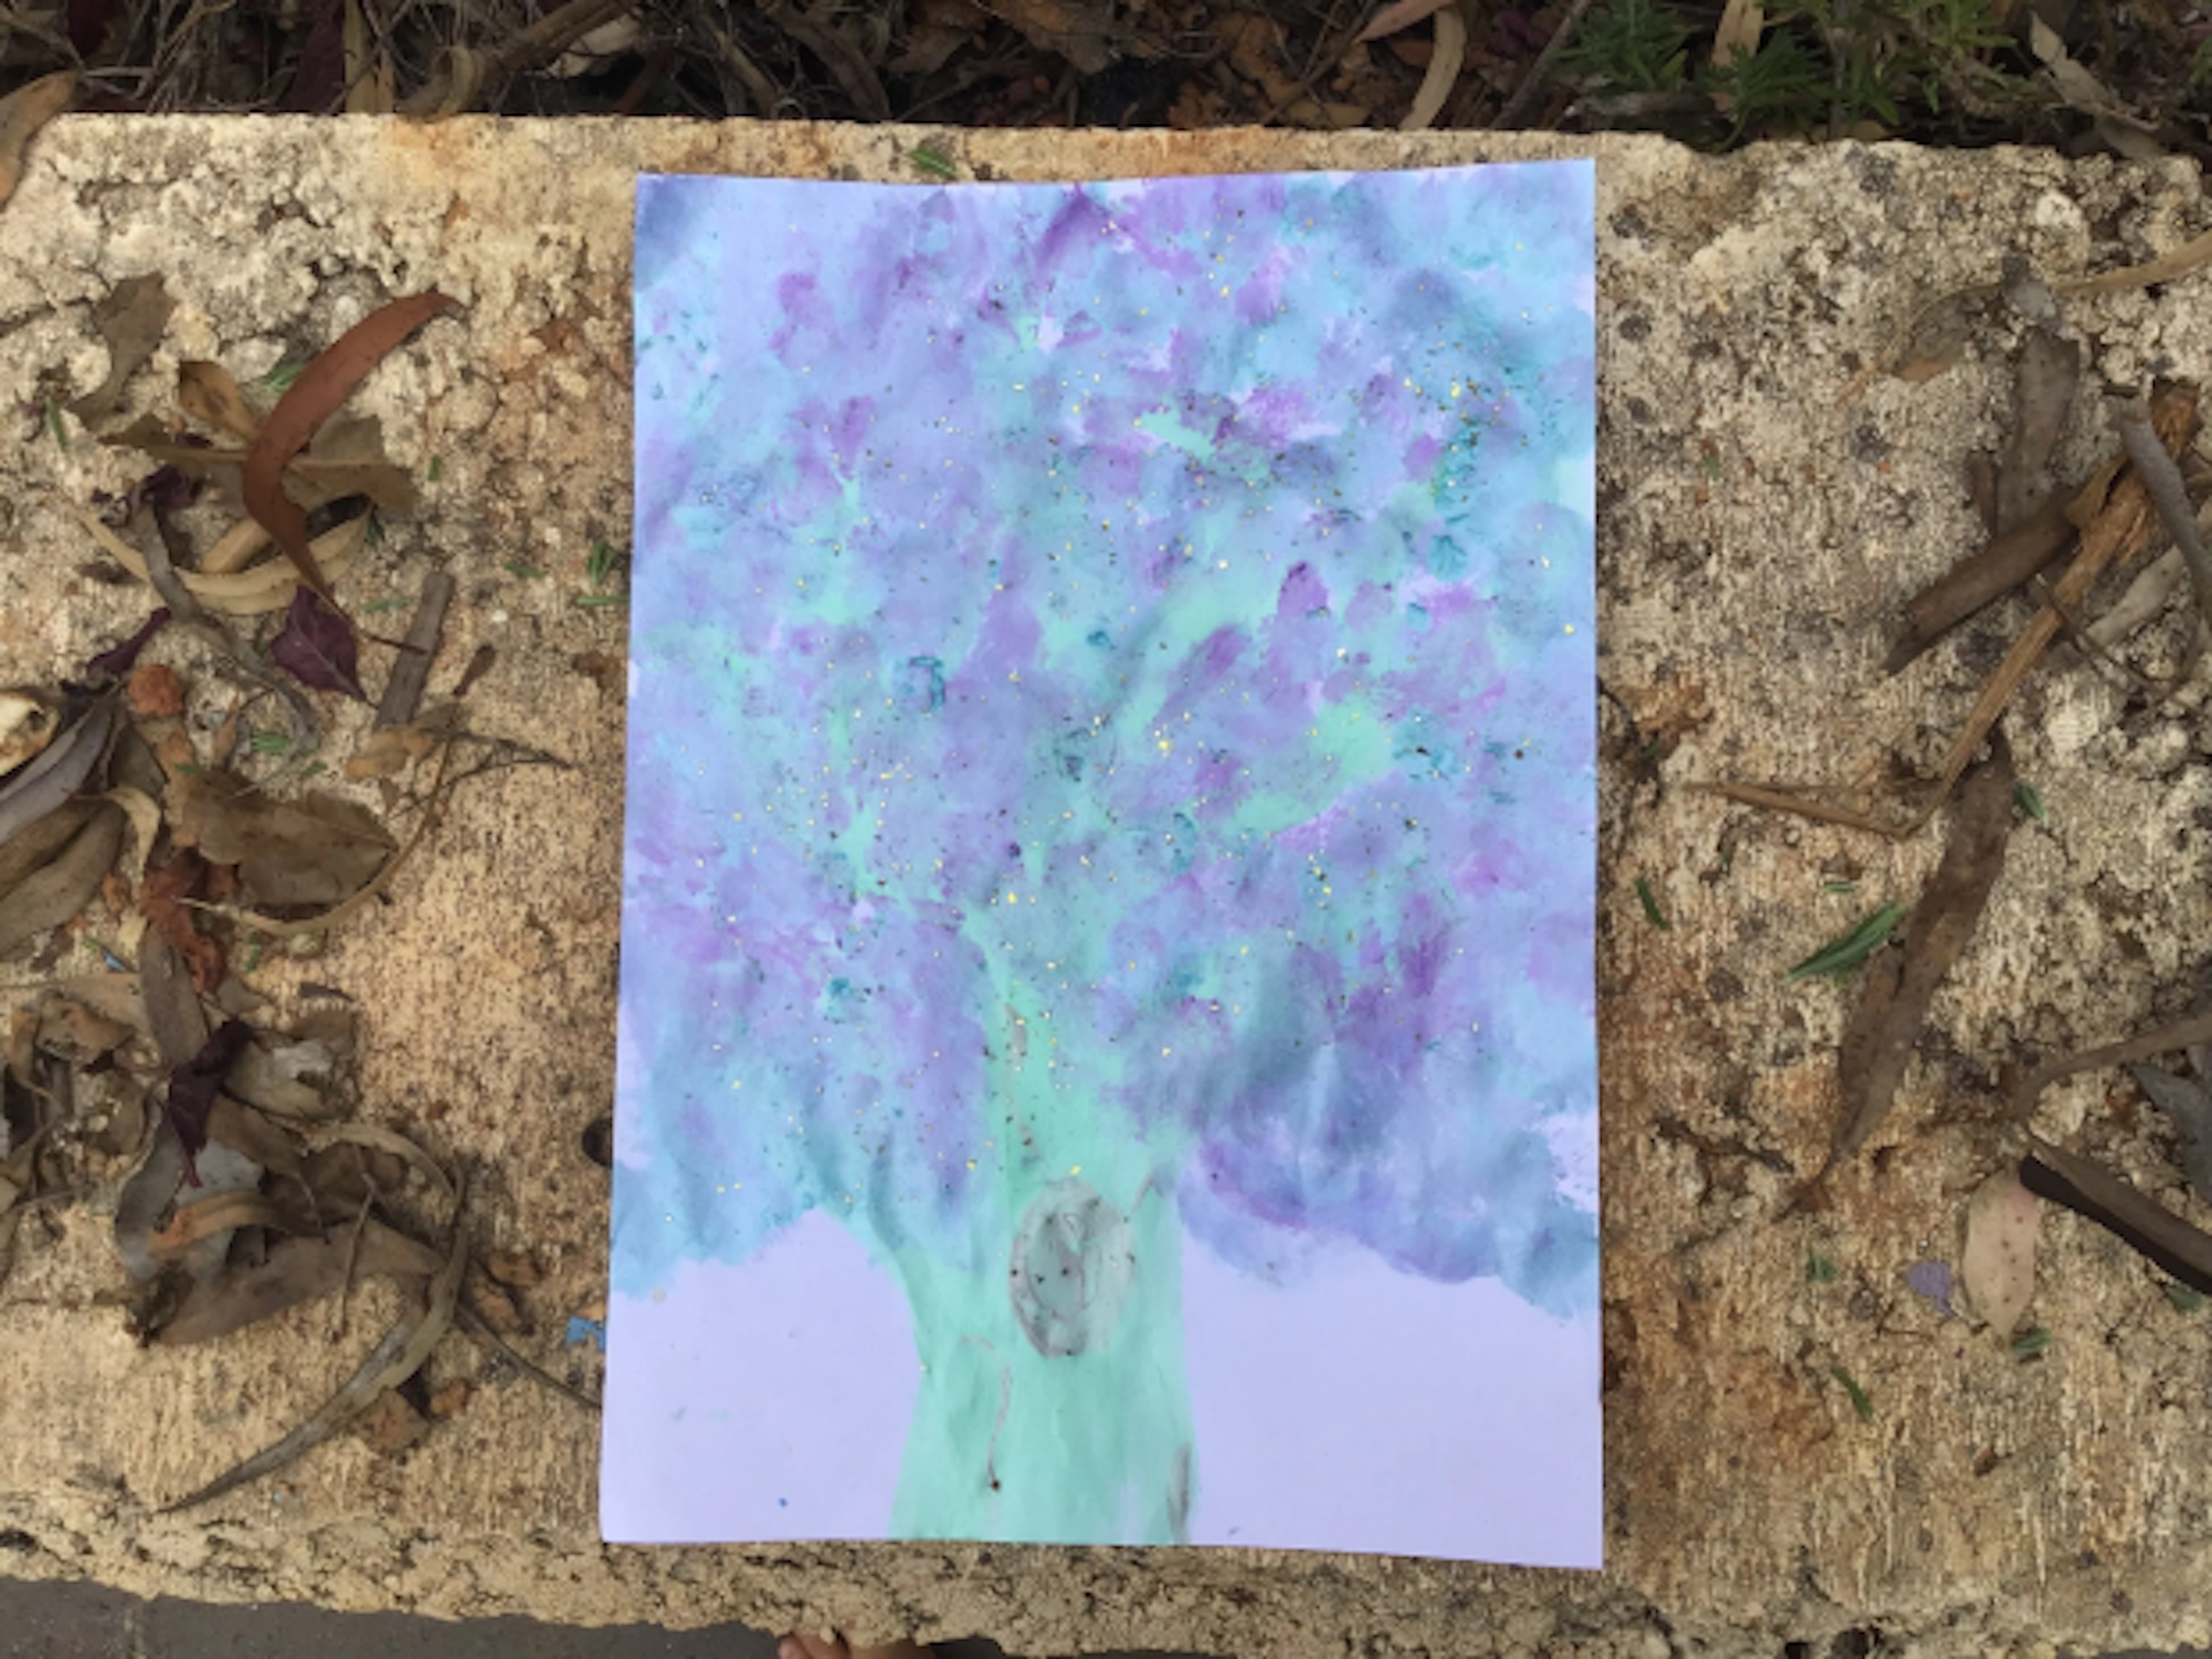 I think I painted this picture of a tree outside in my garden